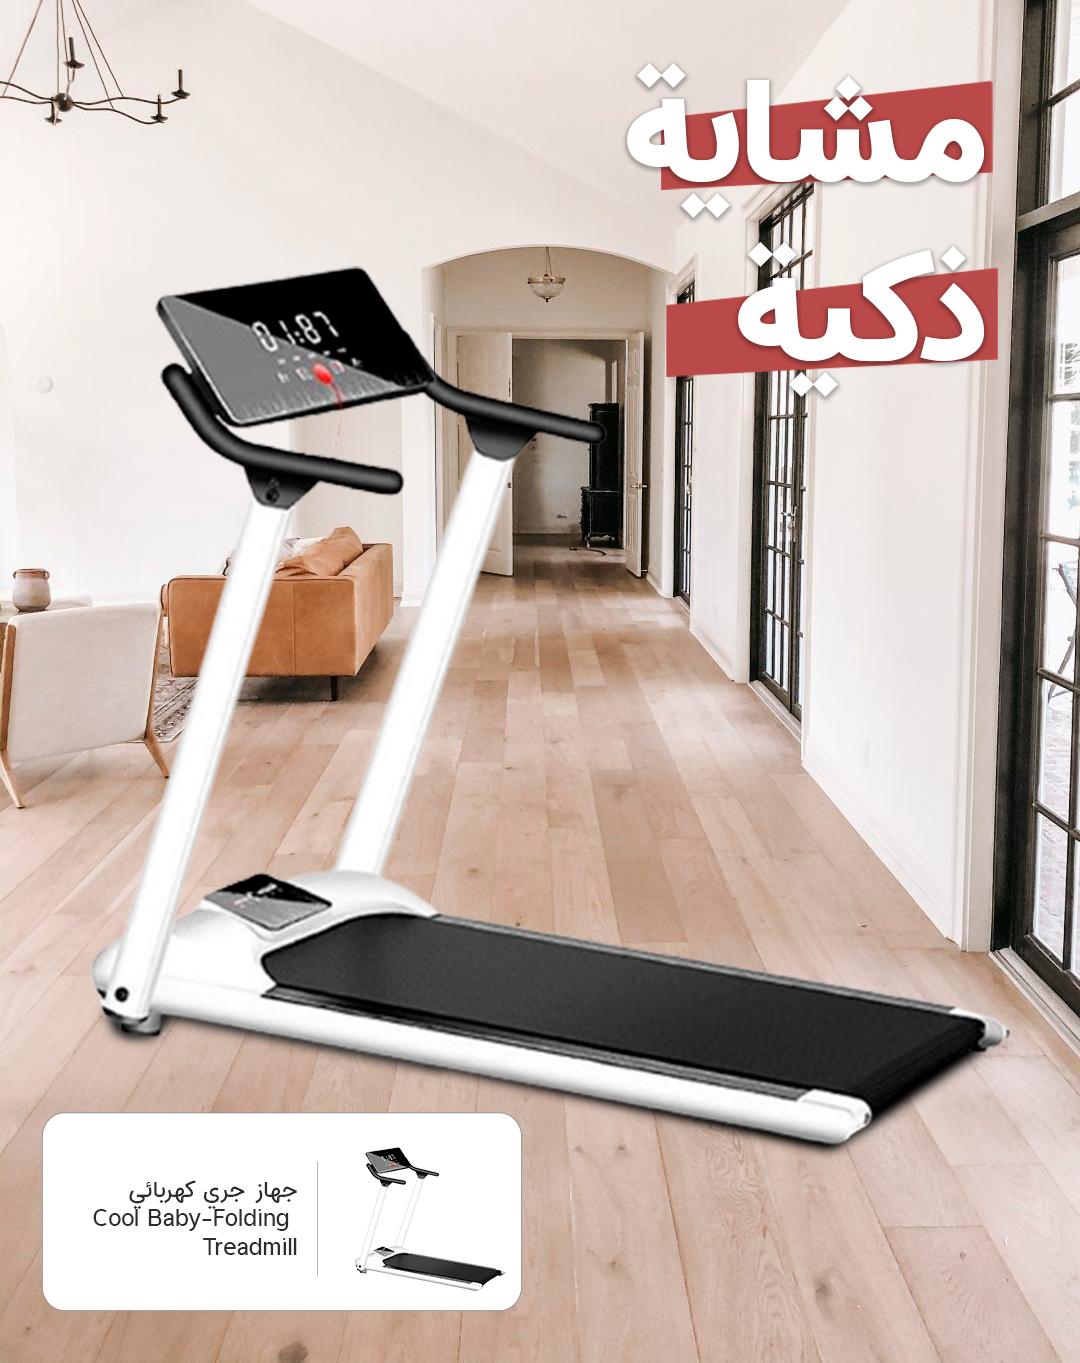 Cool Baby Folding Treadmill With LED Display 120x56x10cm